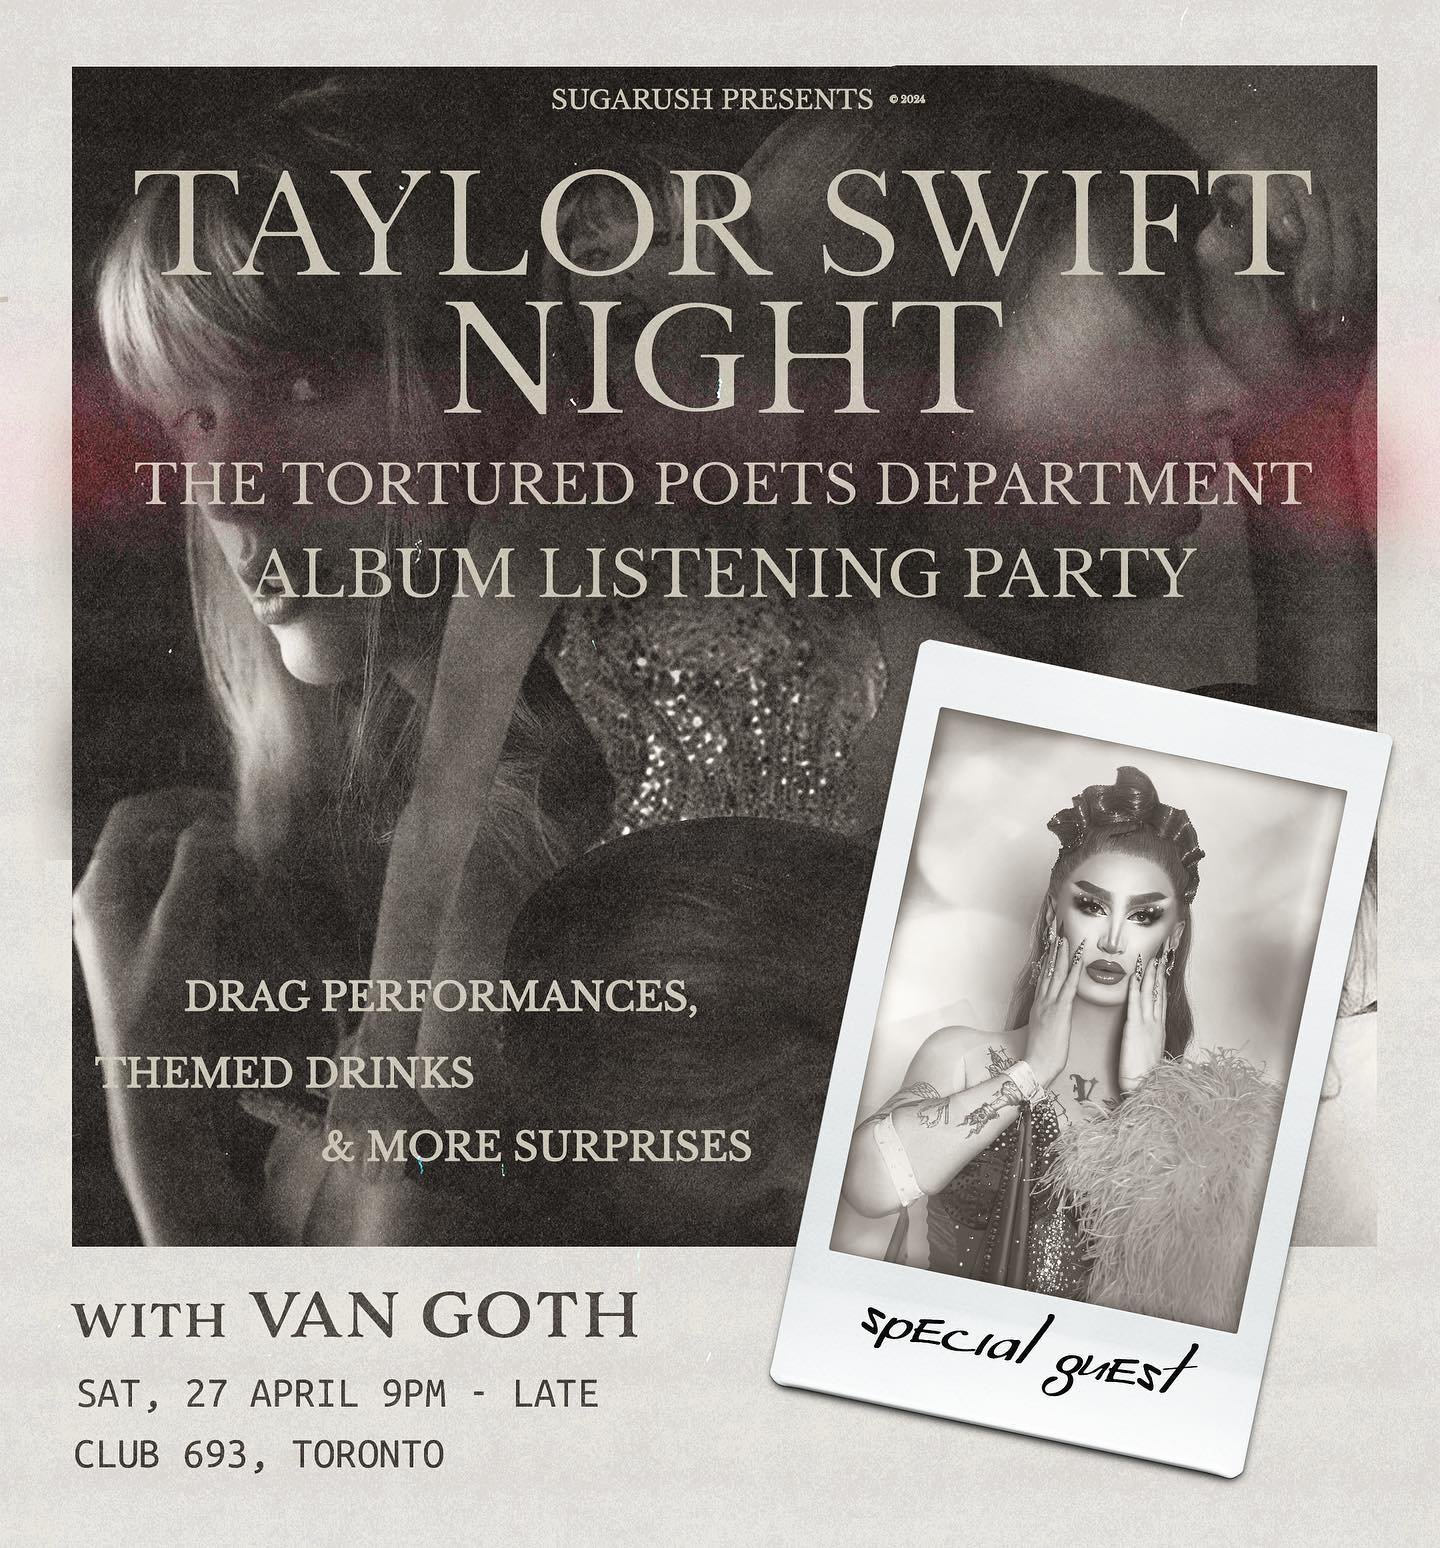 SWIFTIES! Taylor&rsquo;s 11th studio album &lsquo;The Tortured Poets Department&rsquo; is almost here! 

We&rsquo;ve lined up some listening parties across Australia and North America so we can all celebrate the release together. 

Our DJs will play 